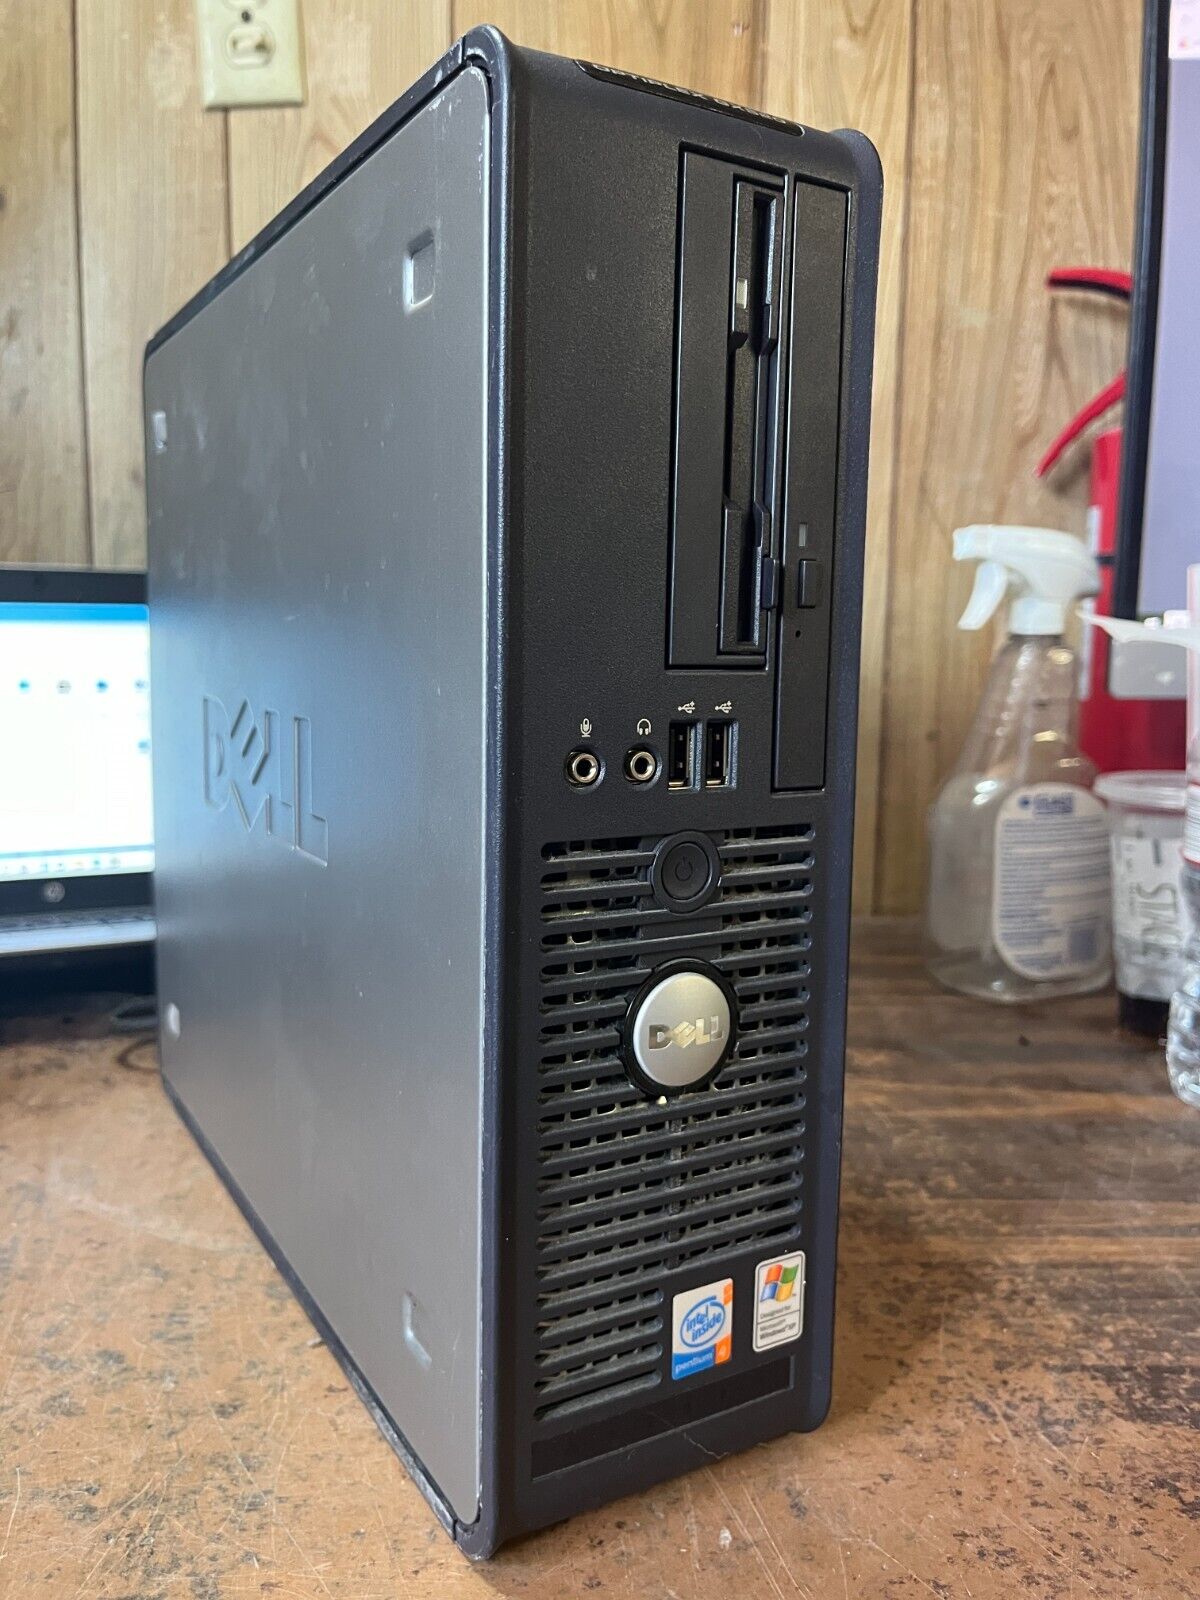 Dell Optiplex GX520 SFF Windows 7 PRO Computer RS232 Serial Parallel Floppy